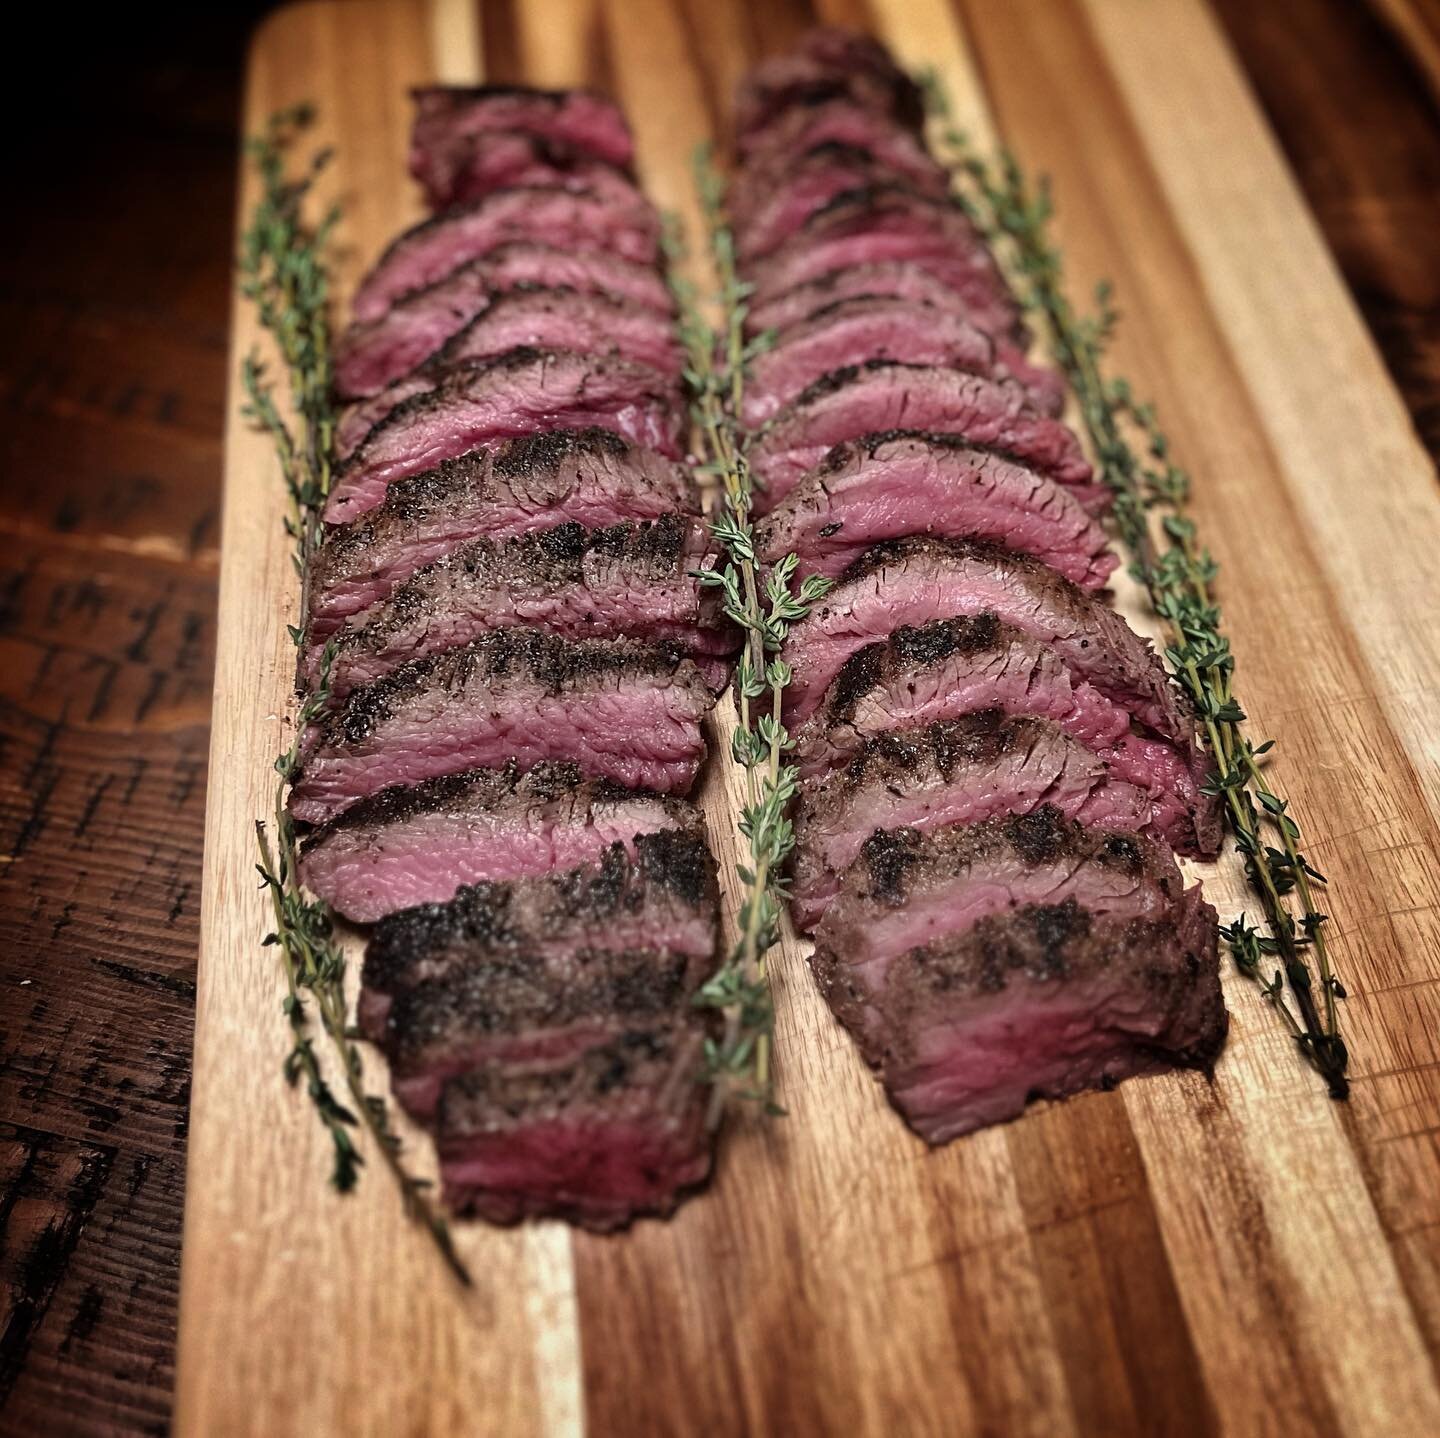 Sous Vide &amp; Seared Beef Petit Tender aka Bistro Filet. 133 degrees w/ @spiceology SPG, Fresh Thyme &amp; @stbrigidscreamery Butter for the win! Seared on the @webergrillsca G2 w/ @grillgrates. Protein: @butchersofdistinction 
.
.
.
. 
#weberambas